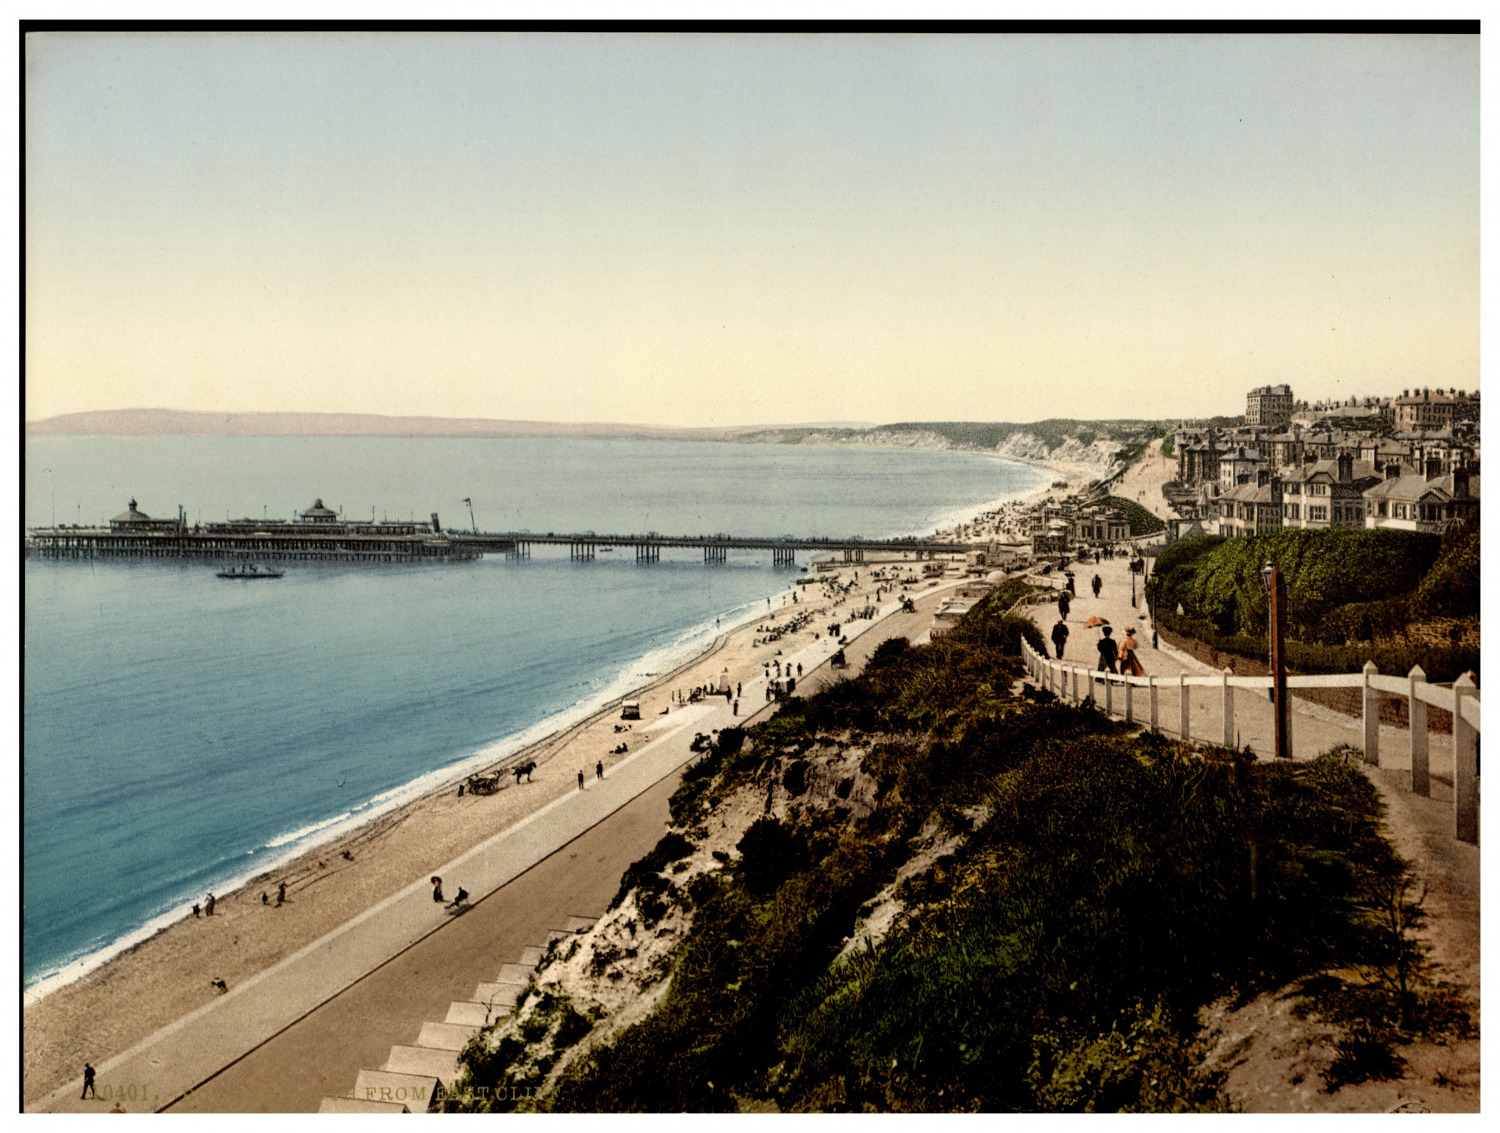 England. Bournemouth from East Cliff. Vintage Photochrome by P.Z, Photochrome Z